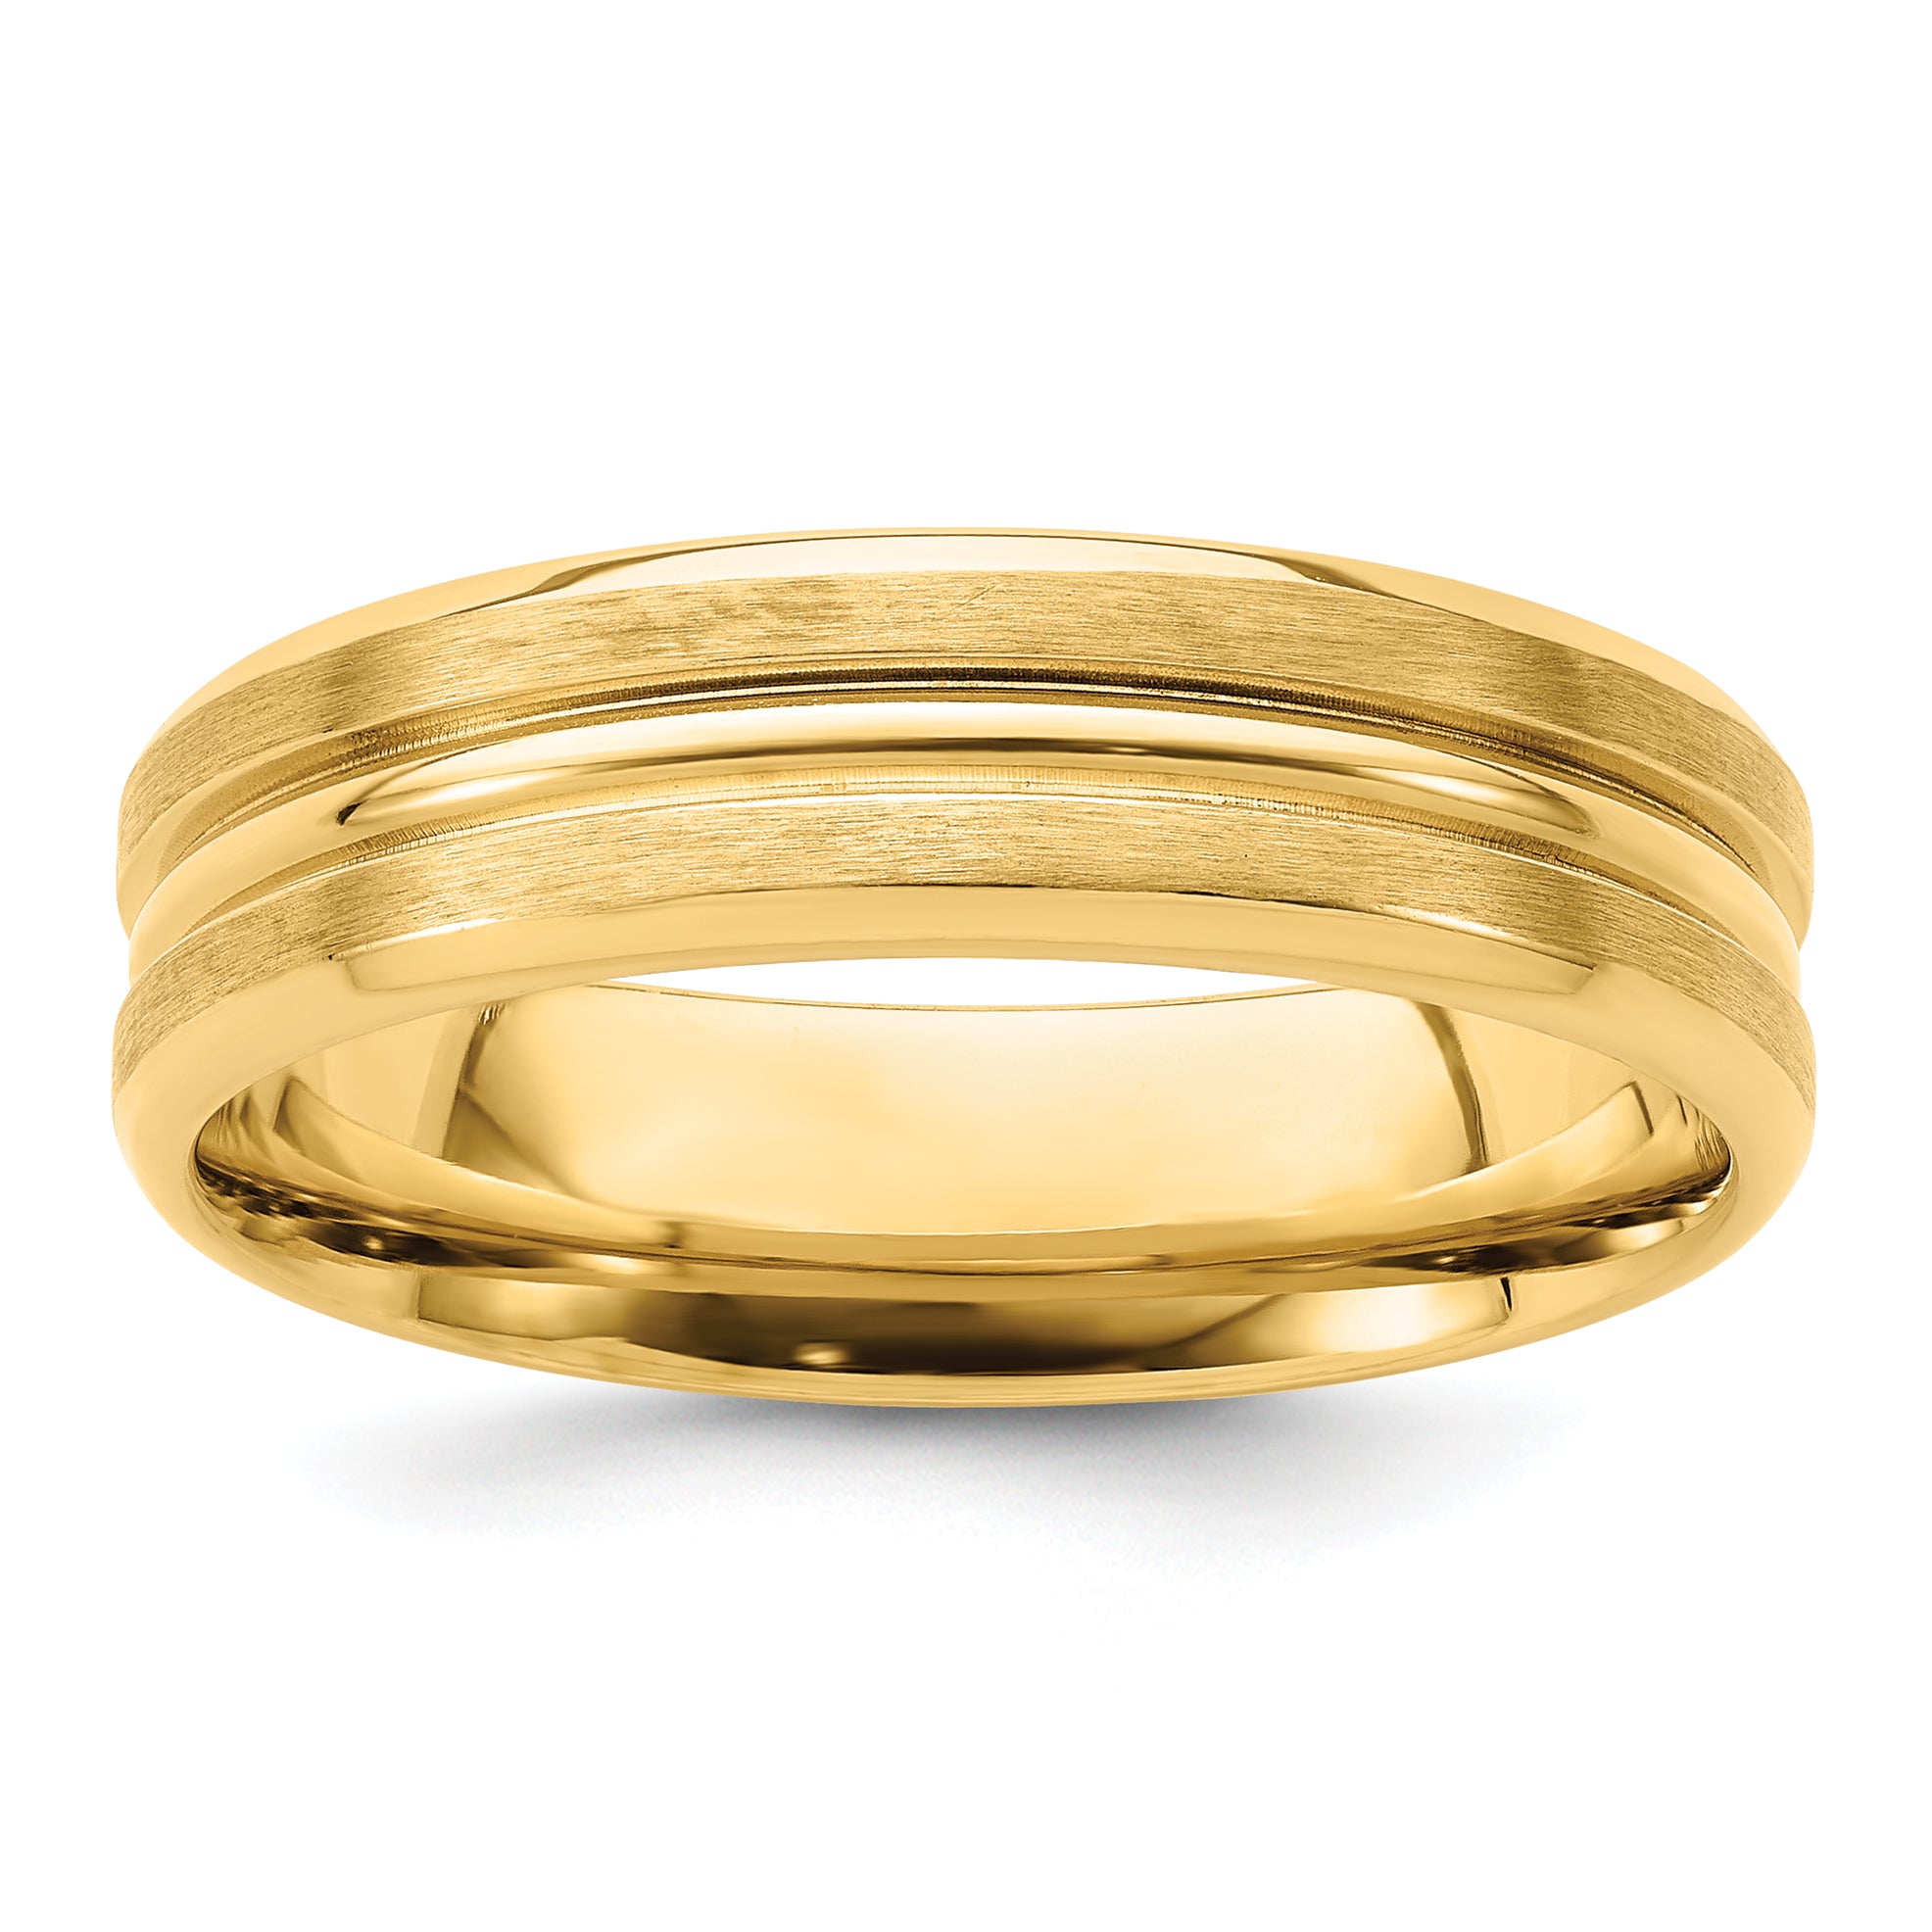 14k Yellow Gold 6mm Standard Weight Comfort Fit Brushed Satin with Center Groove Wedding Band Size 13.5